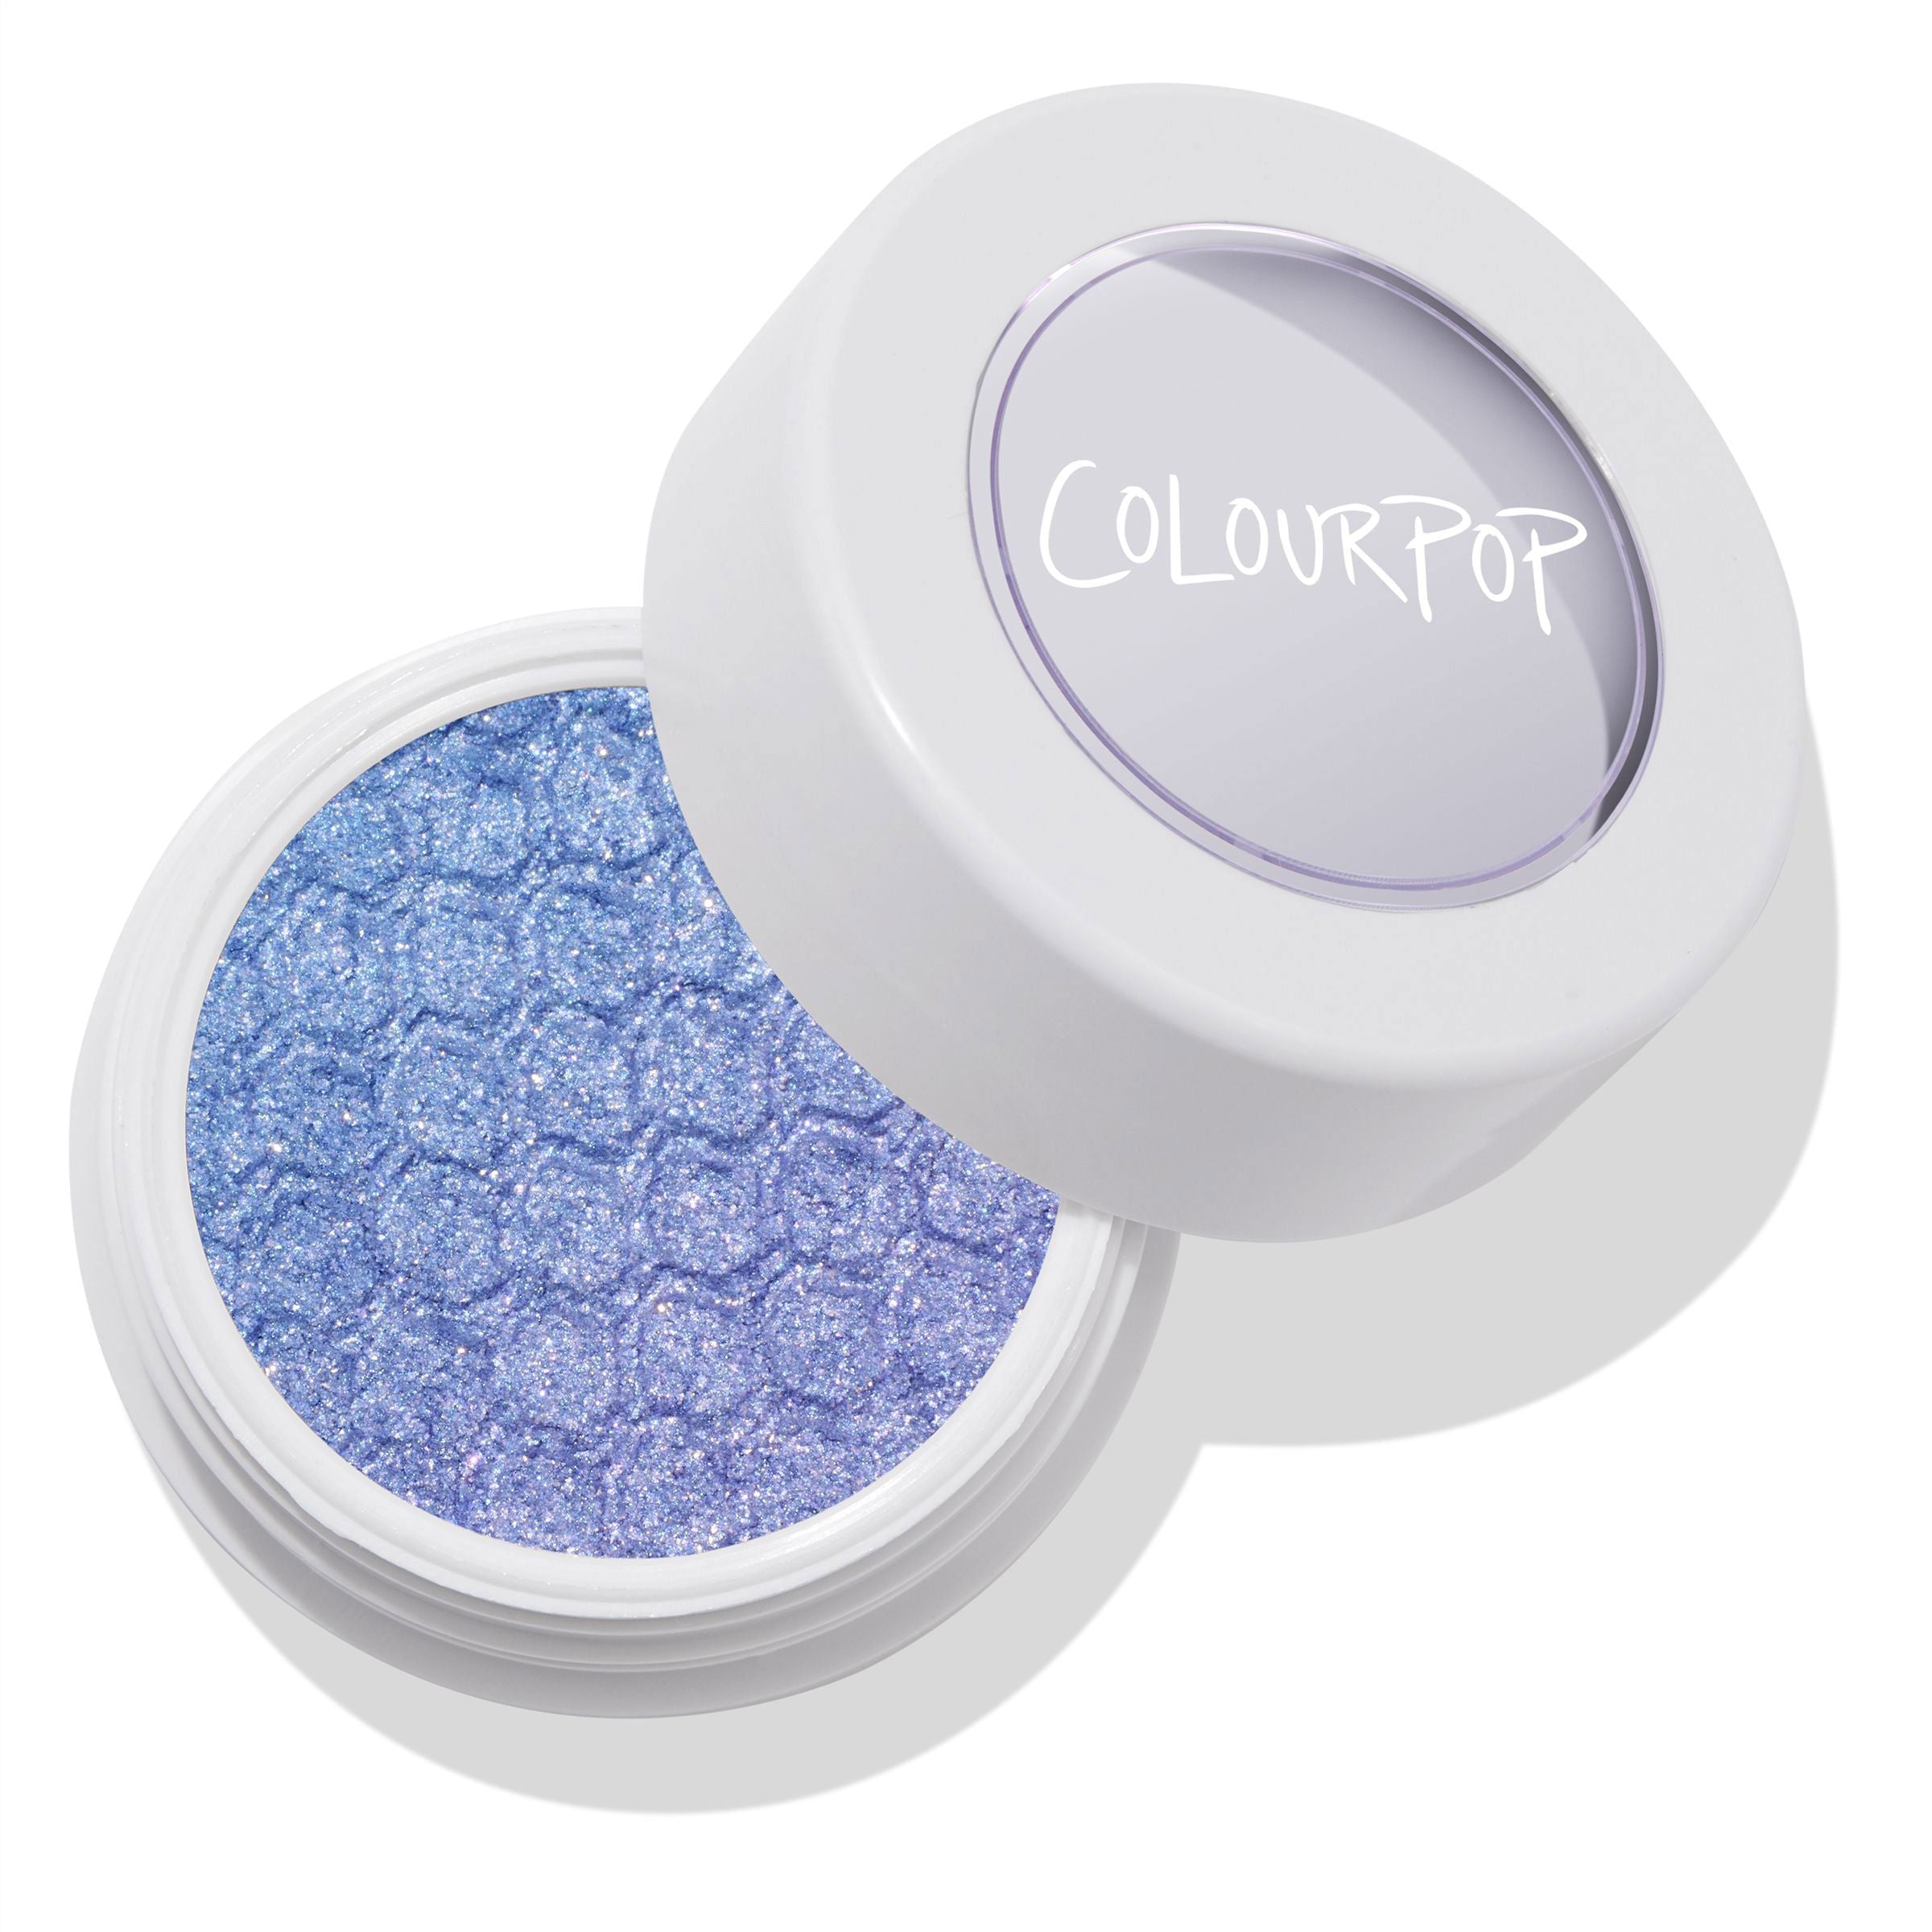 Colourpop super shock shadow in REM a Periwinkle blue with lavender and silver glitter.